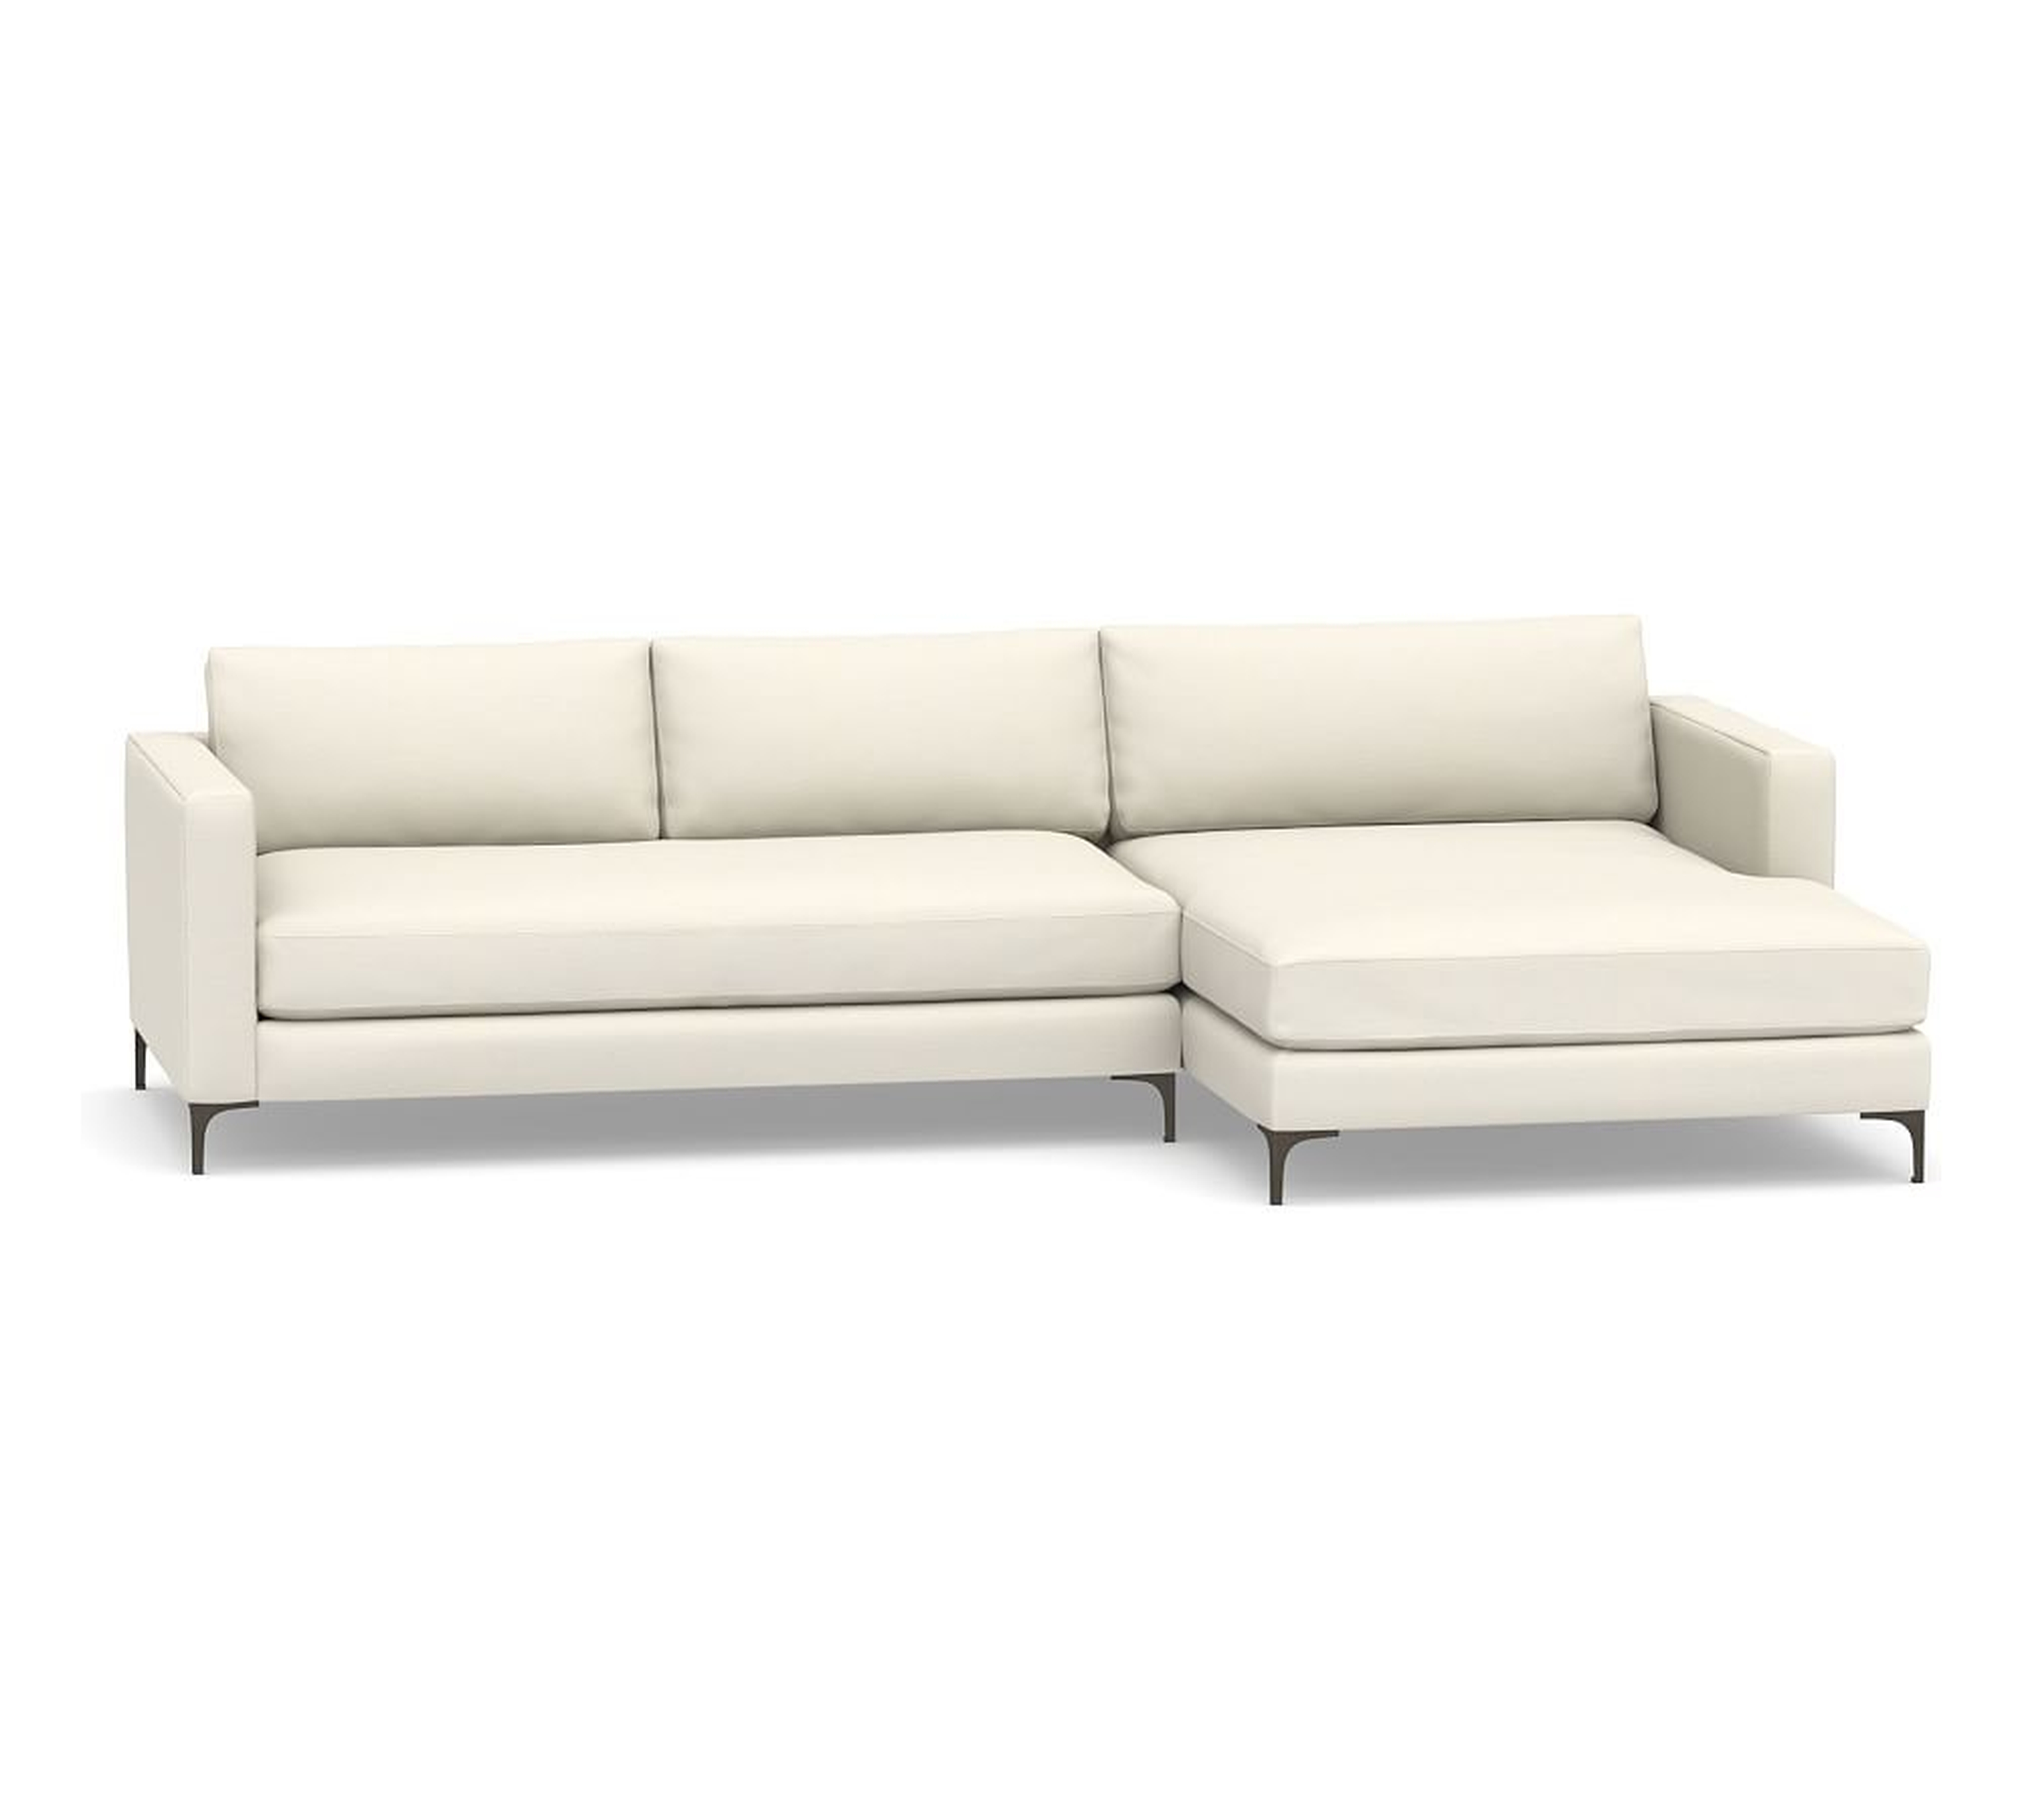 Jake Upholstered Left Arm 2-Piece Sectional with Double Chaise with Bronze Legs, Polyester Wrapped Cushions, Textured Twill Ivory - Pottery Barn